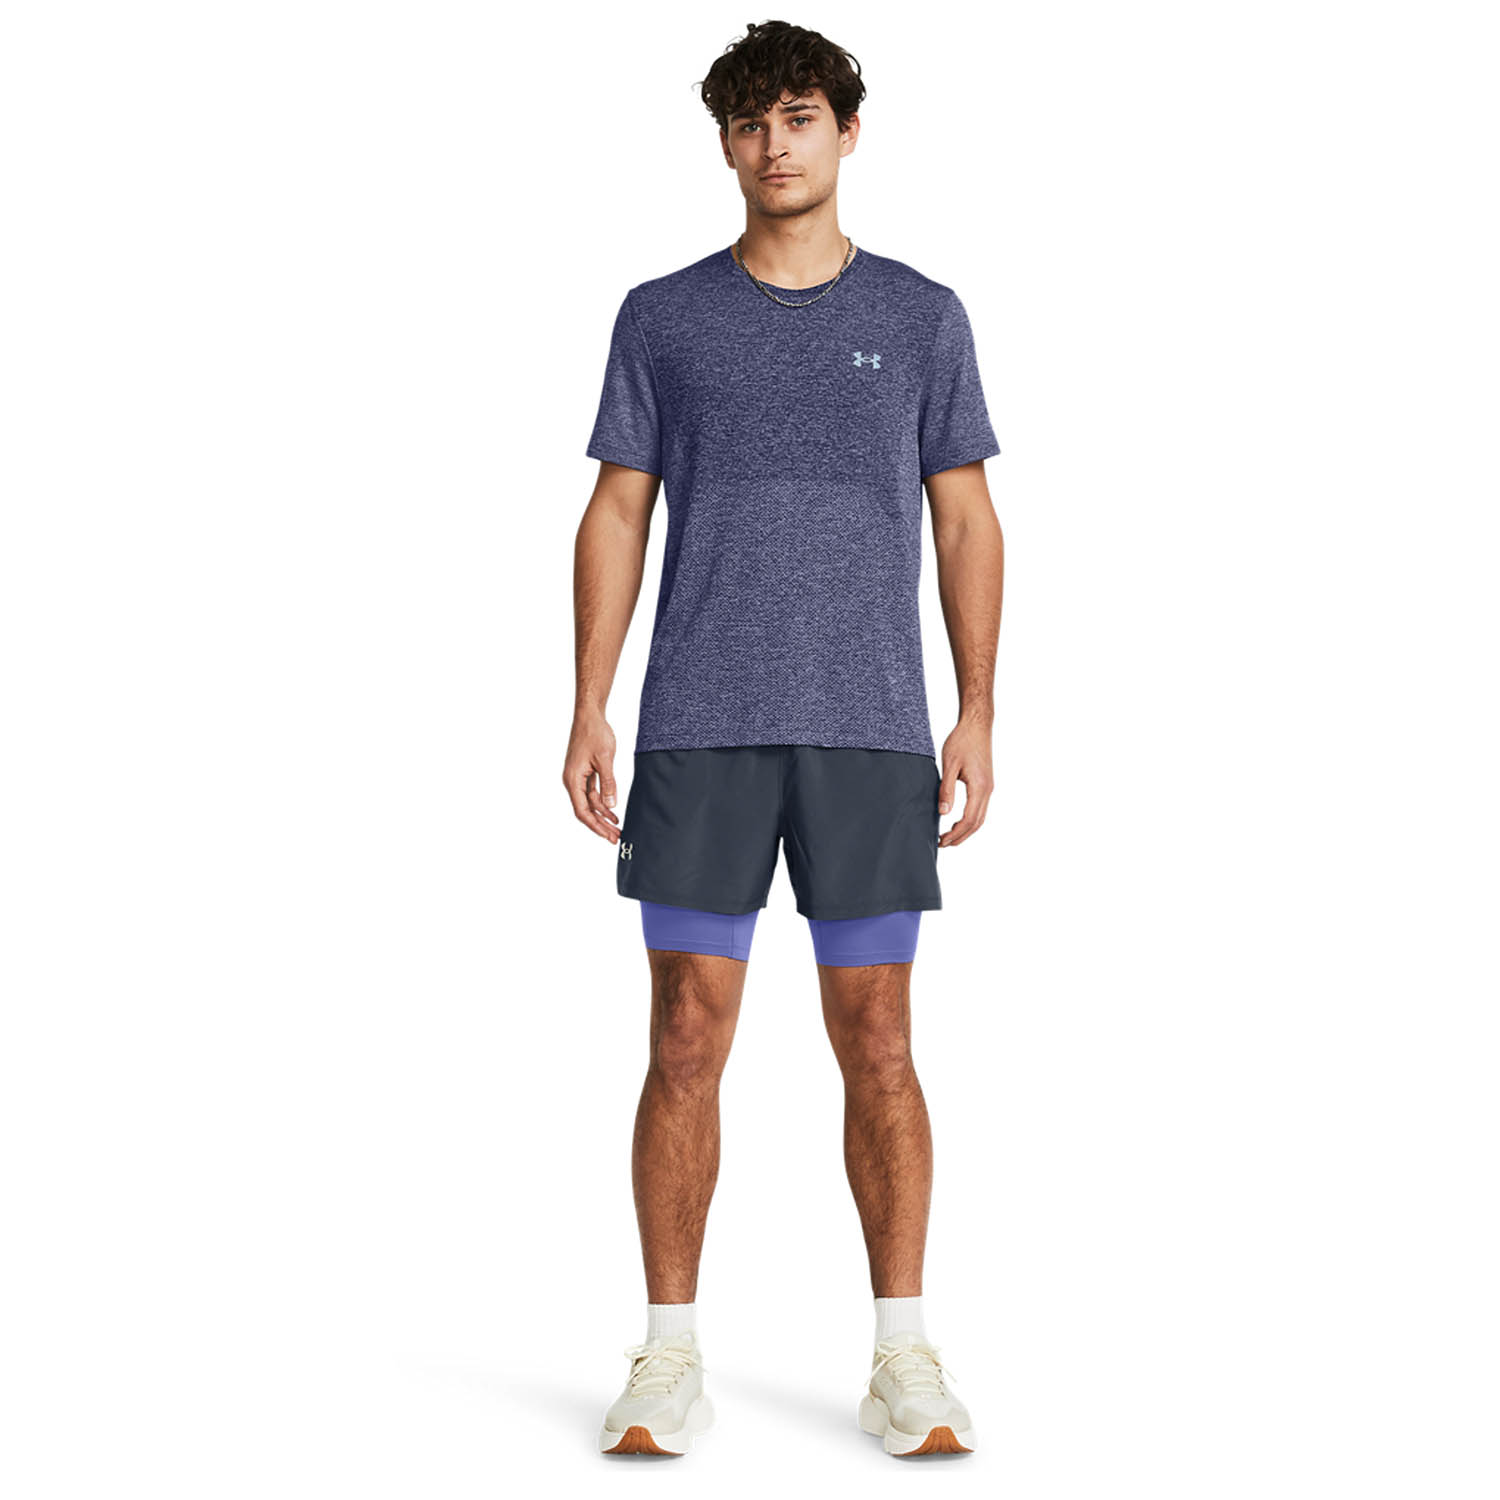 Under Armour Launch 5in 2 in 1 Shorts - Downpuor Gray/Starlight/Reflective